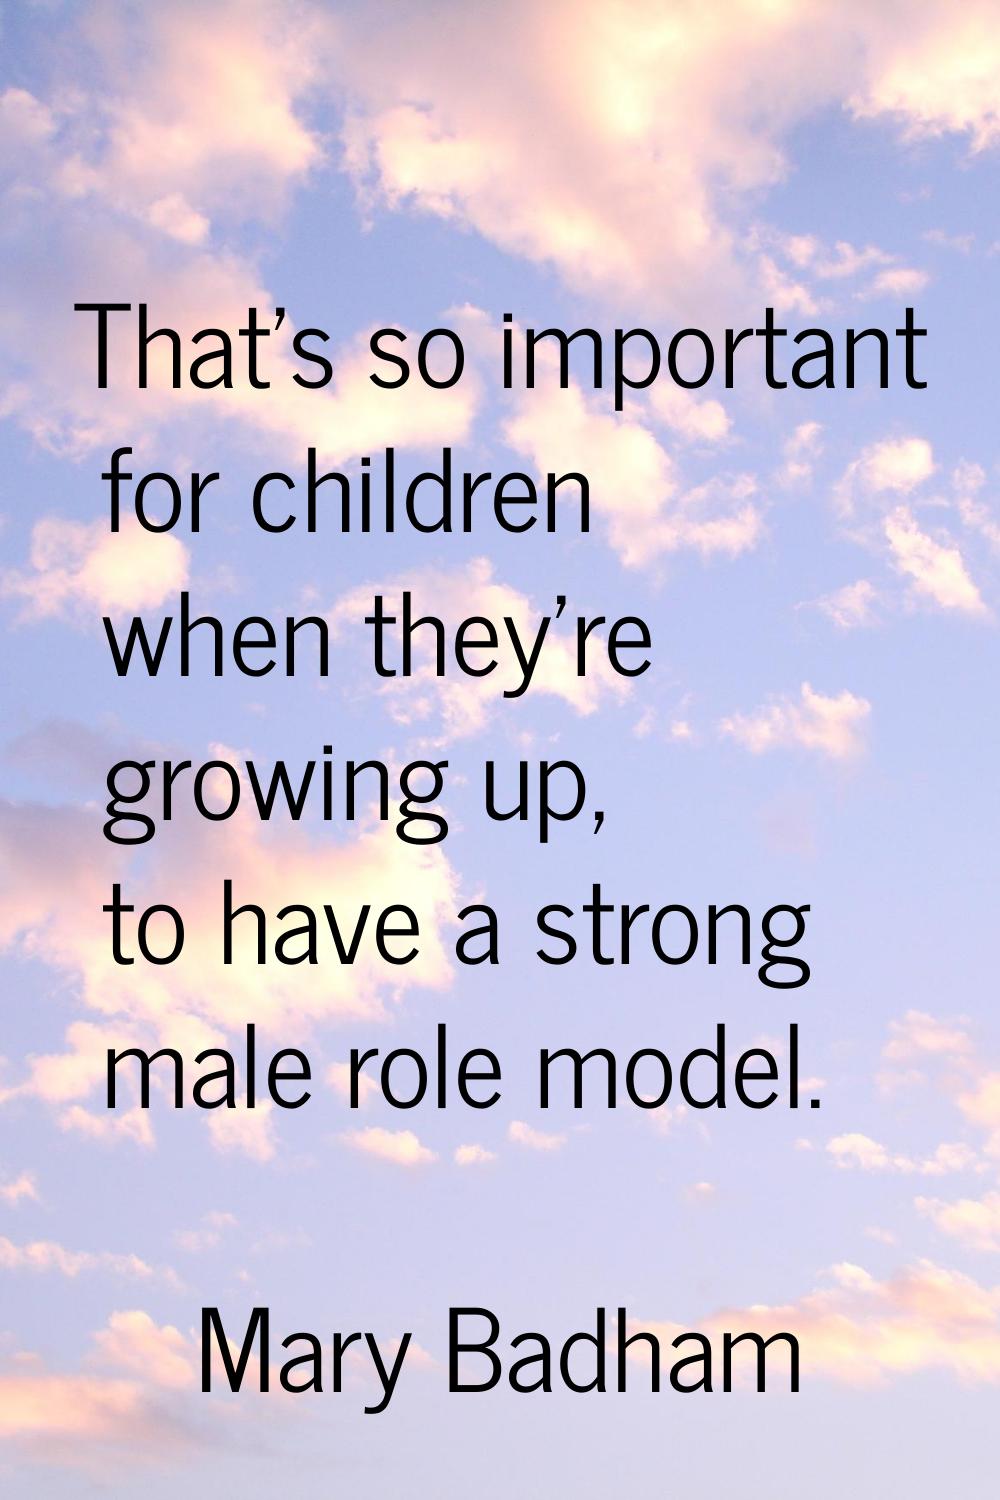 That's so important for children when they're growing up, to have a strong male role model.